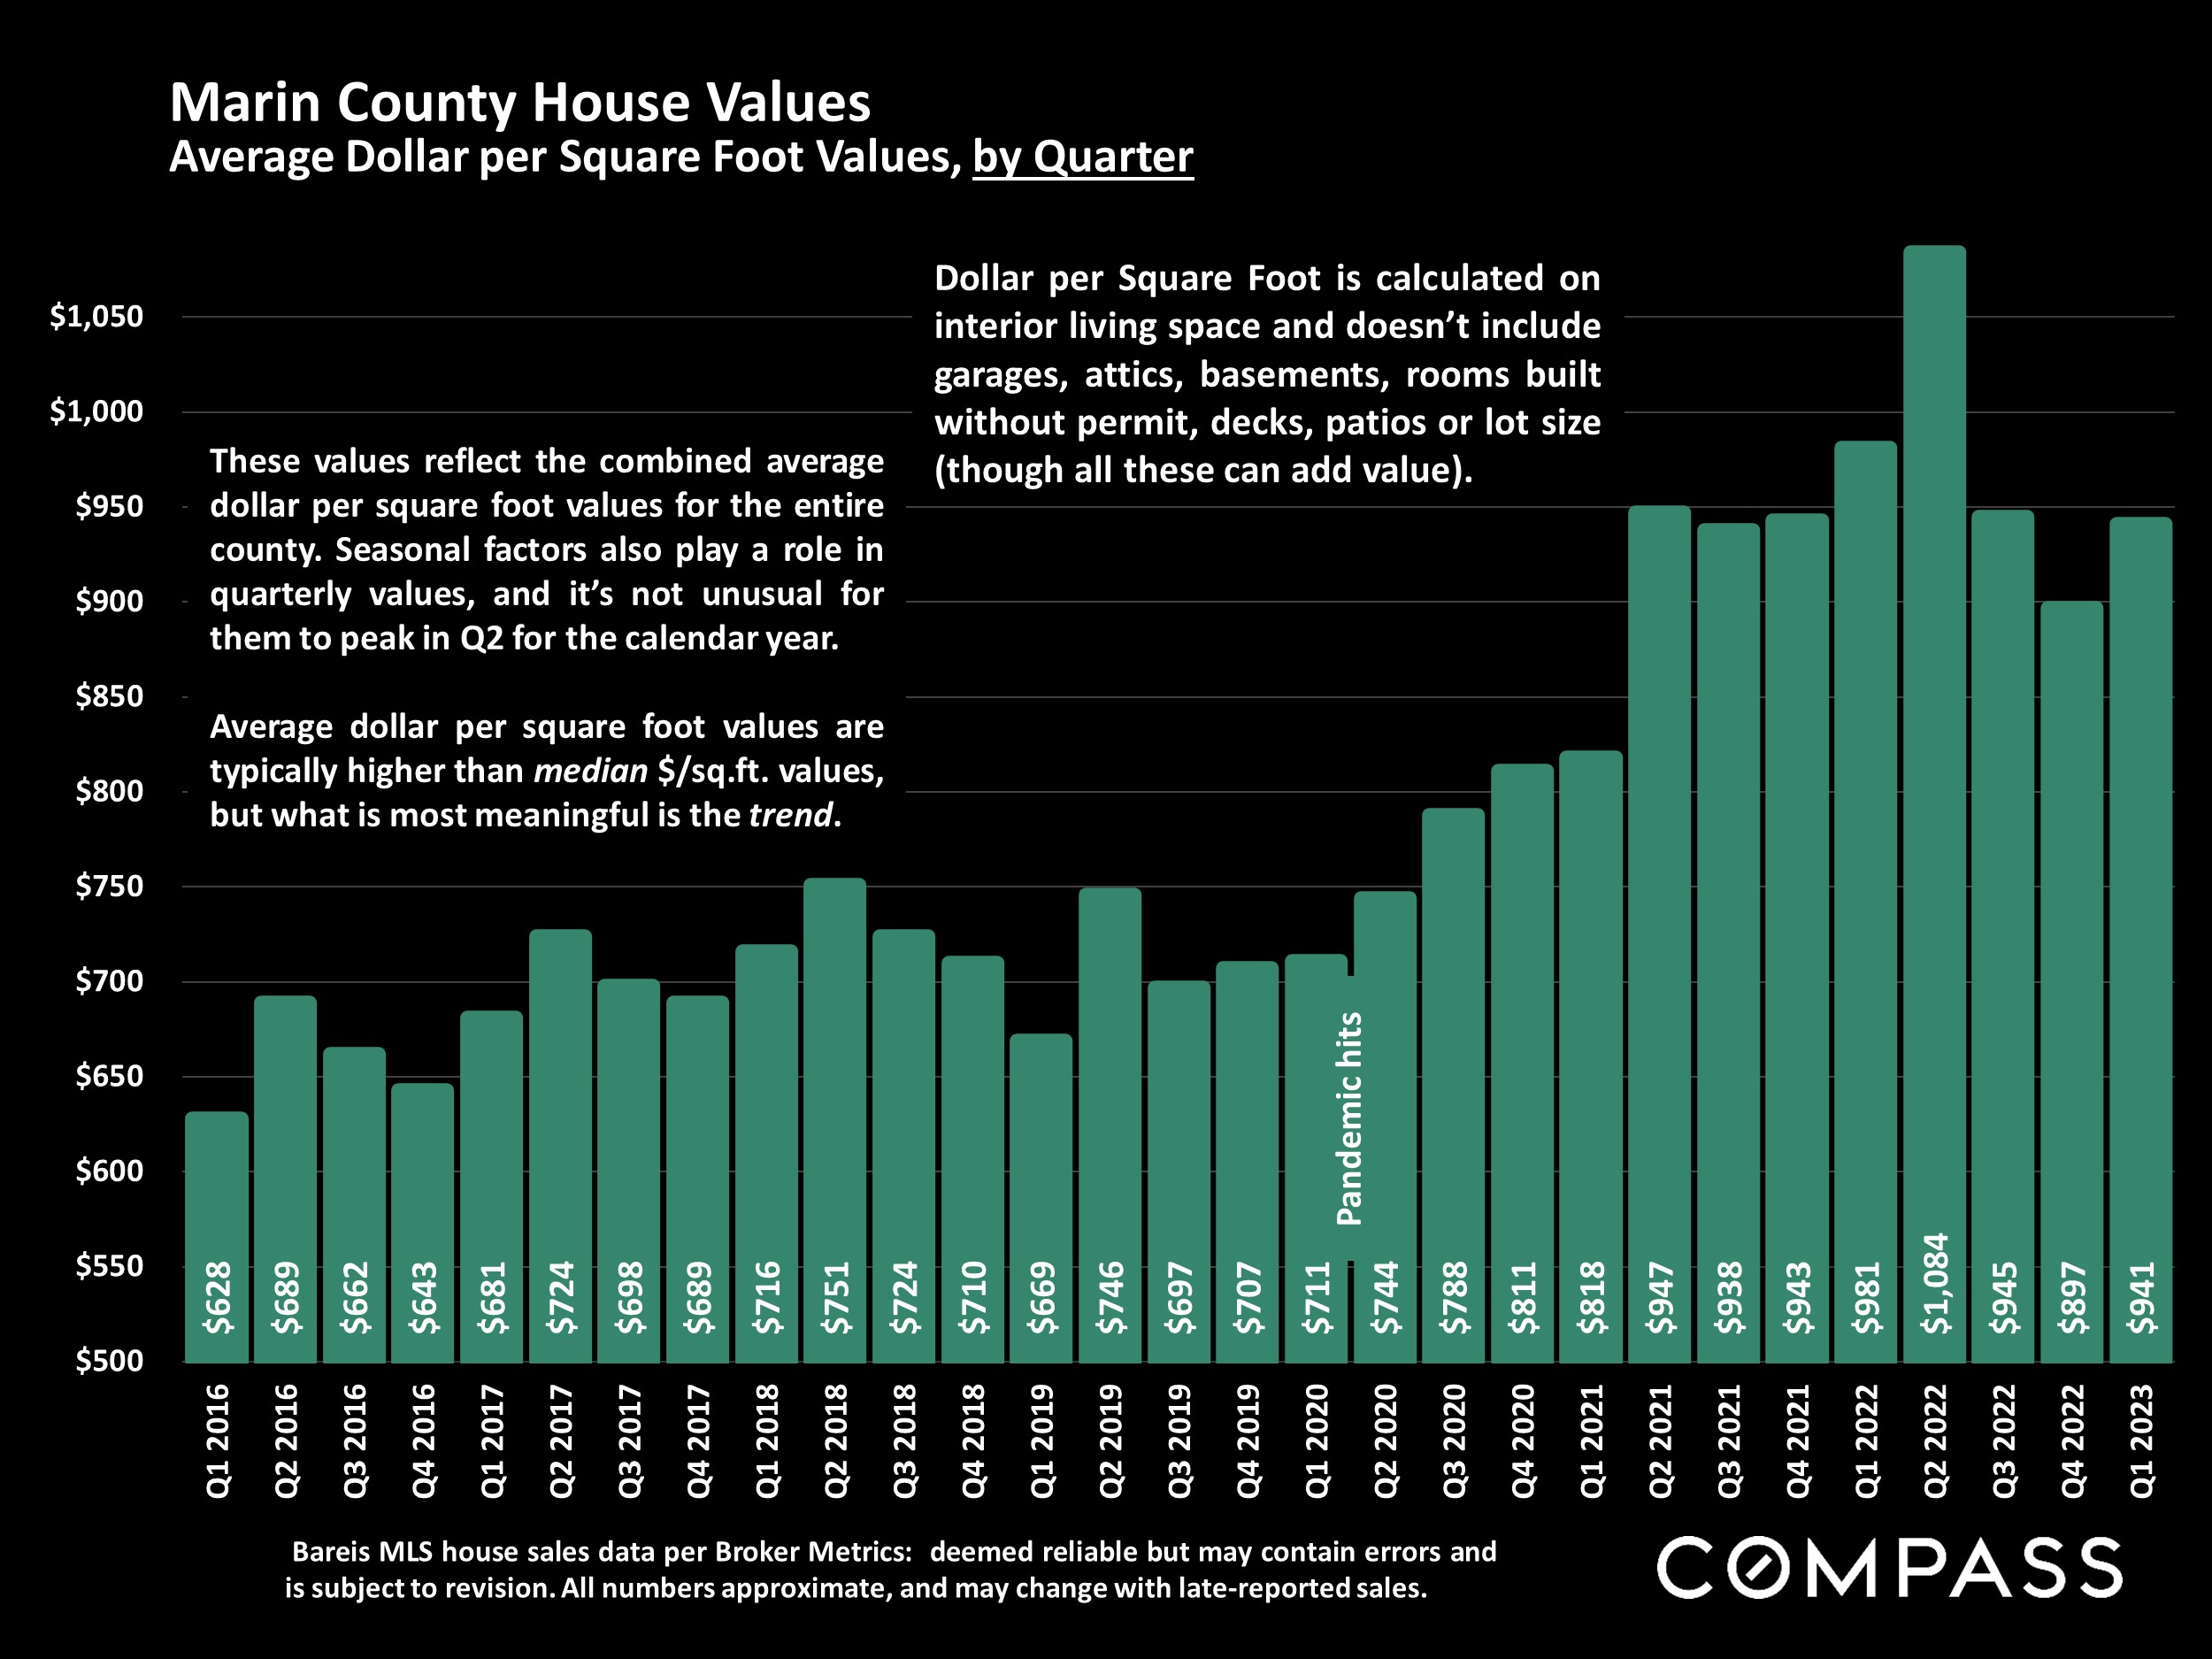 Marin County House Values Average Dollar per Square Foot Values, by Quarter